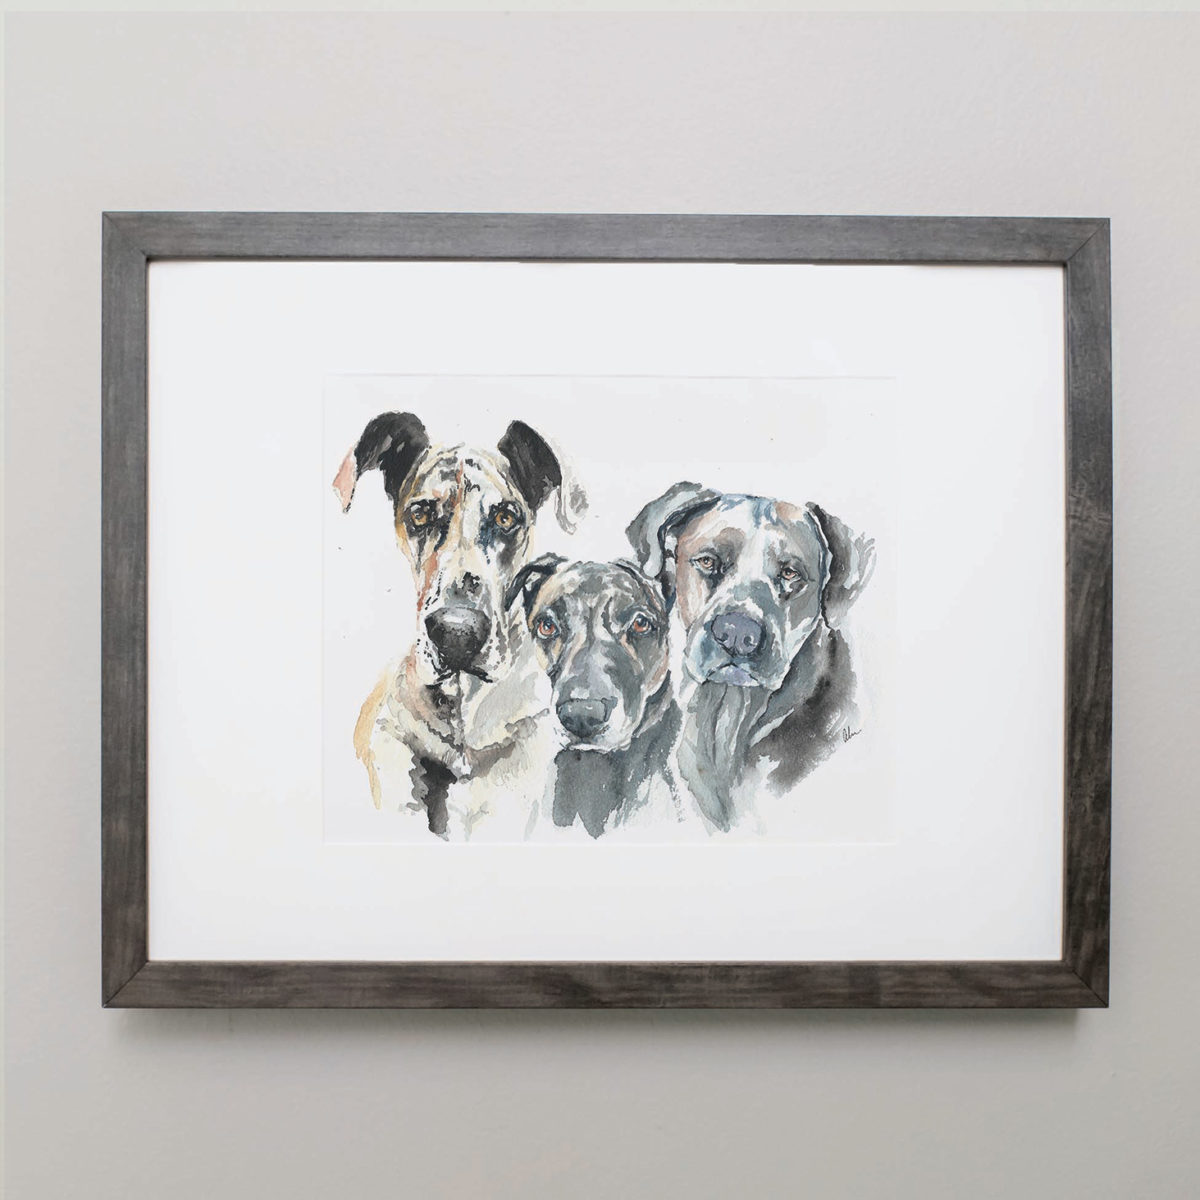 Watercolor of three dogs in a gray frame